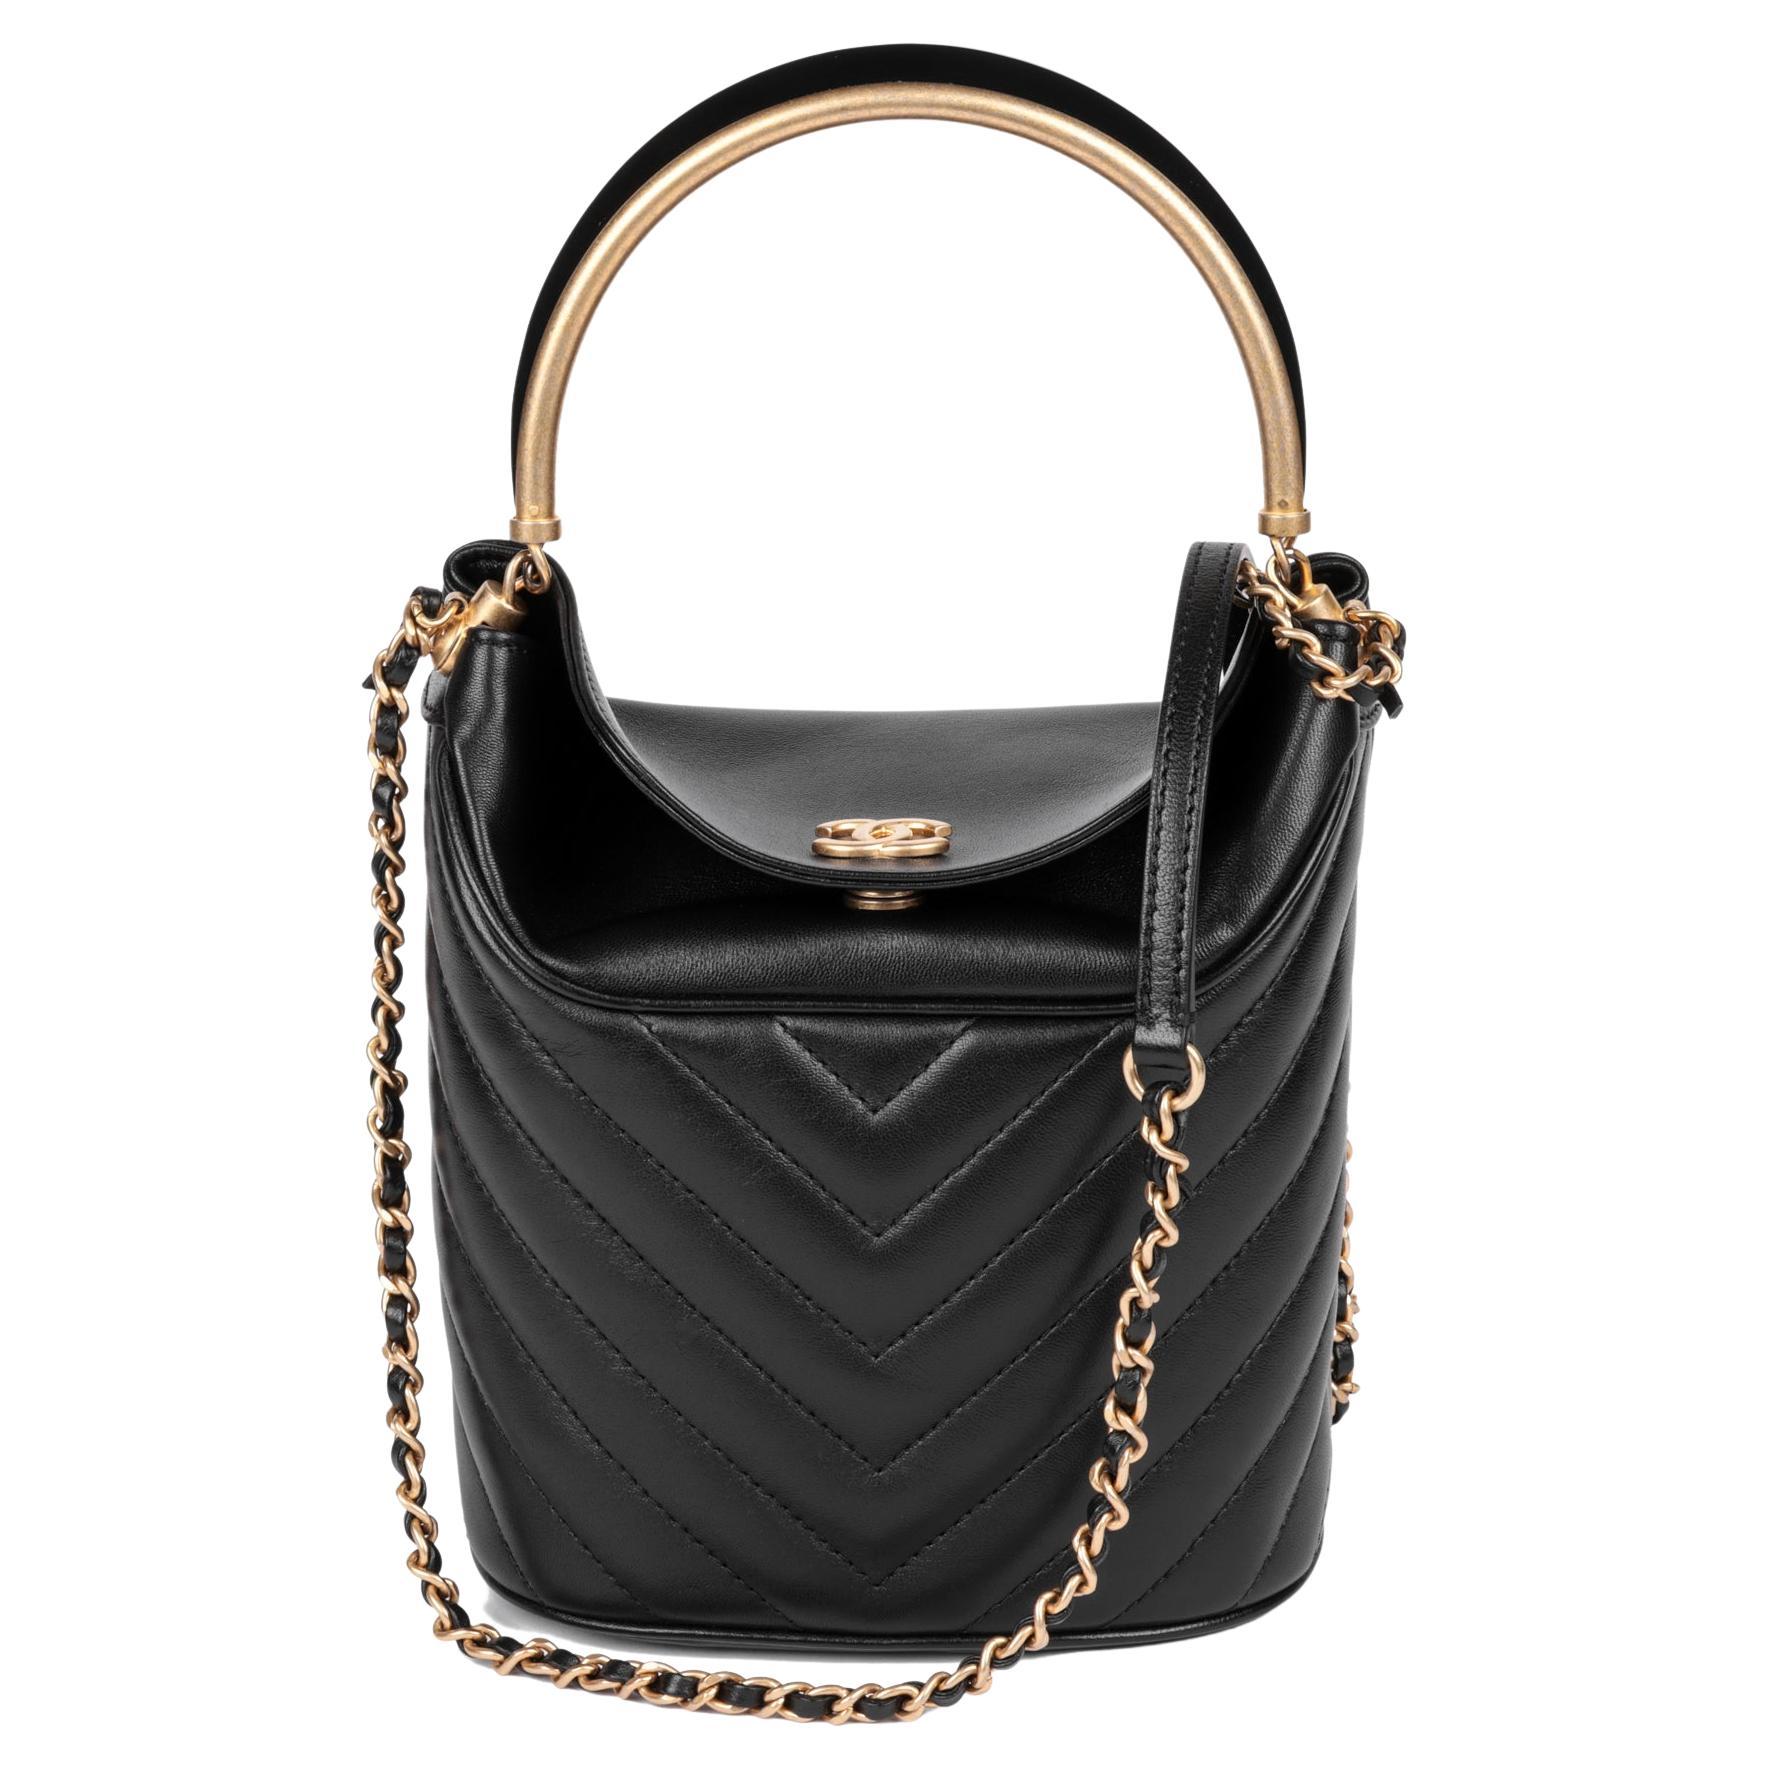 CHANEL Black Chevron Quilted Lambskin Handle with Chic Bucket Bag